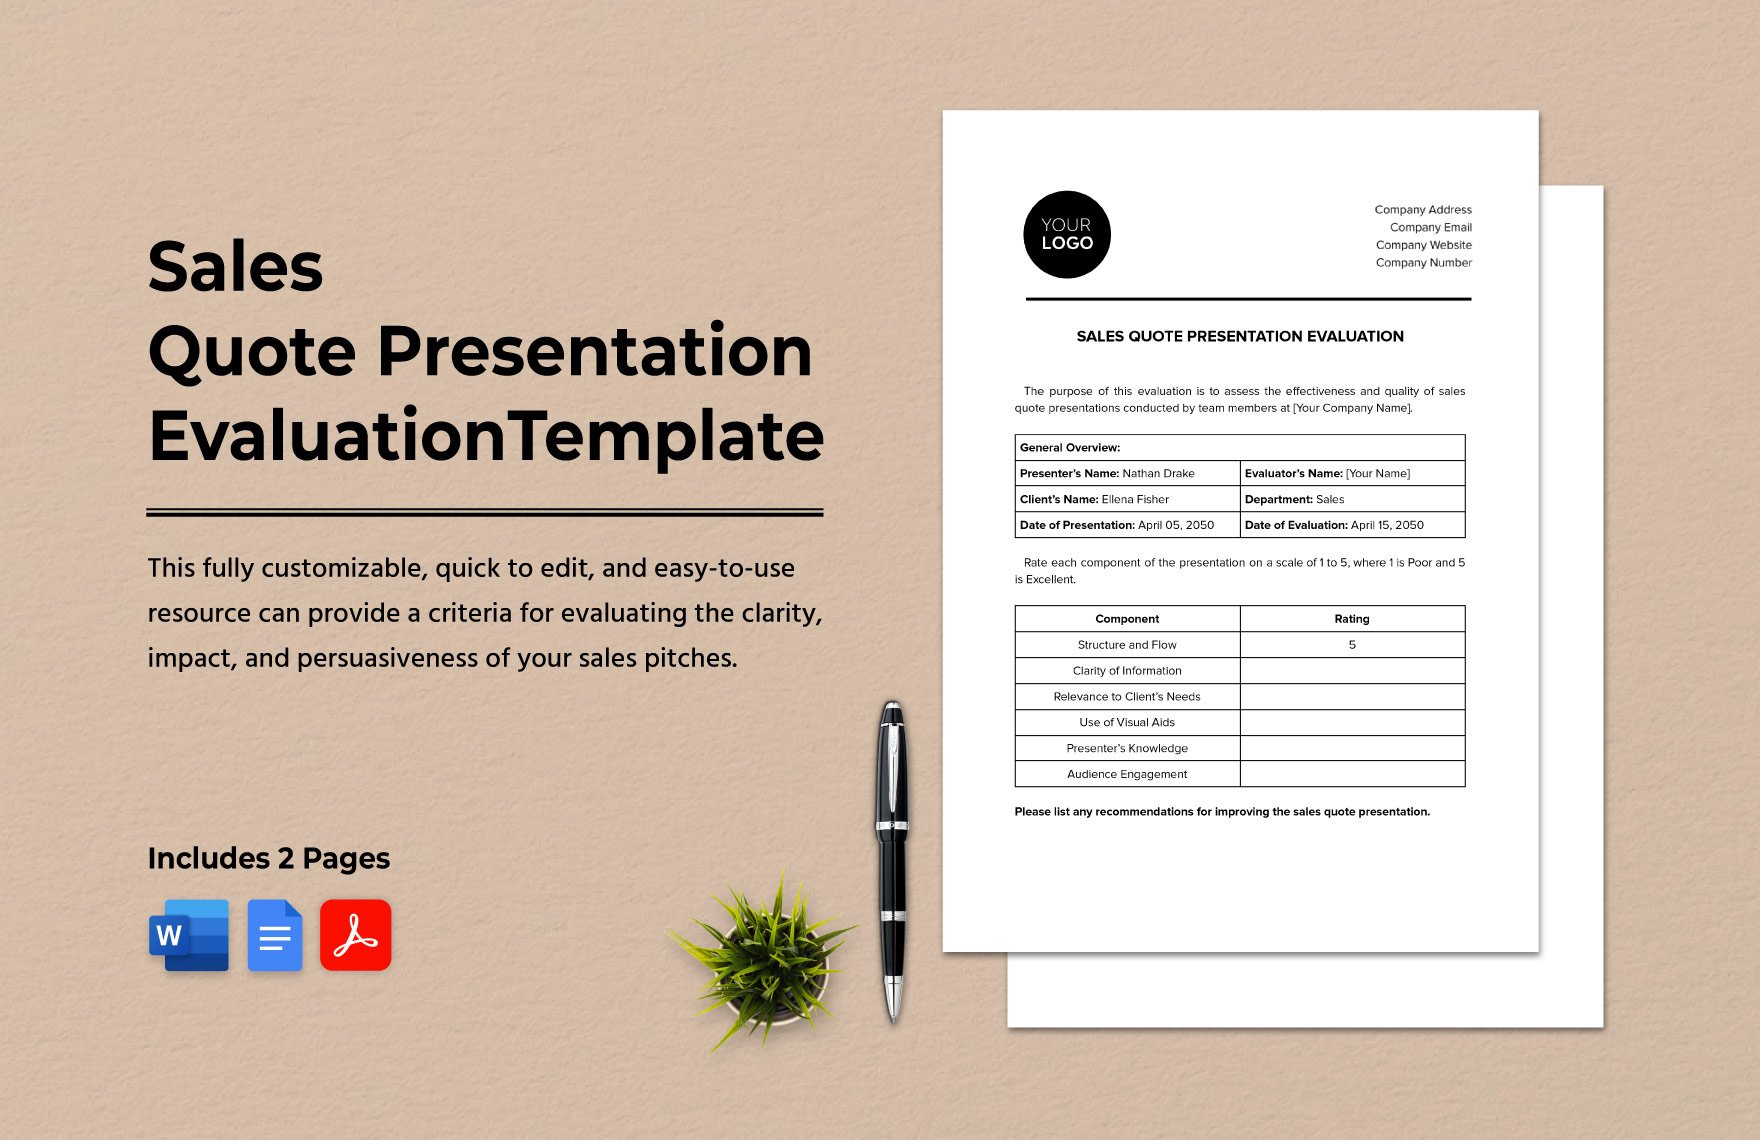 Sales Quote Presentation Evaluation Template in Word, Google Docs, PDF